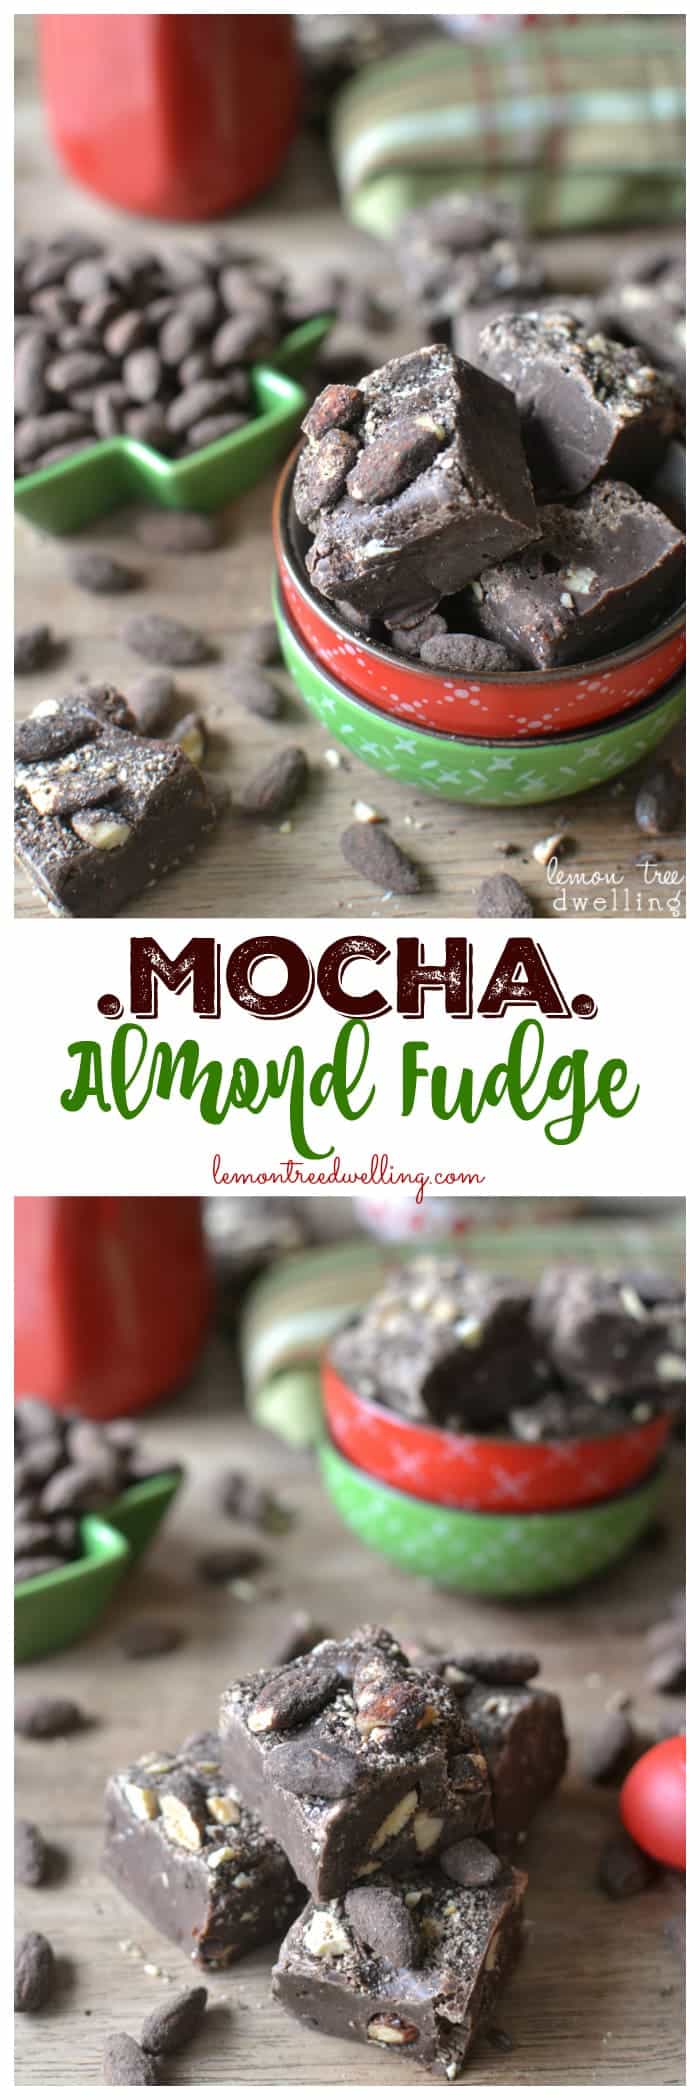 Mocha Almond Fudge is so rich and creamy! Laced with espresso and dark chocolate almonds, this 4 ingredient no-bake fudge is so easy to make and SO delicious!